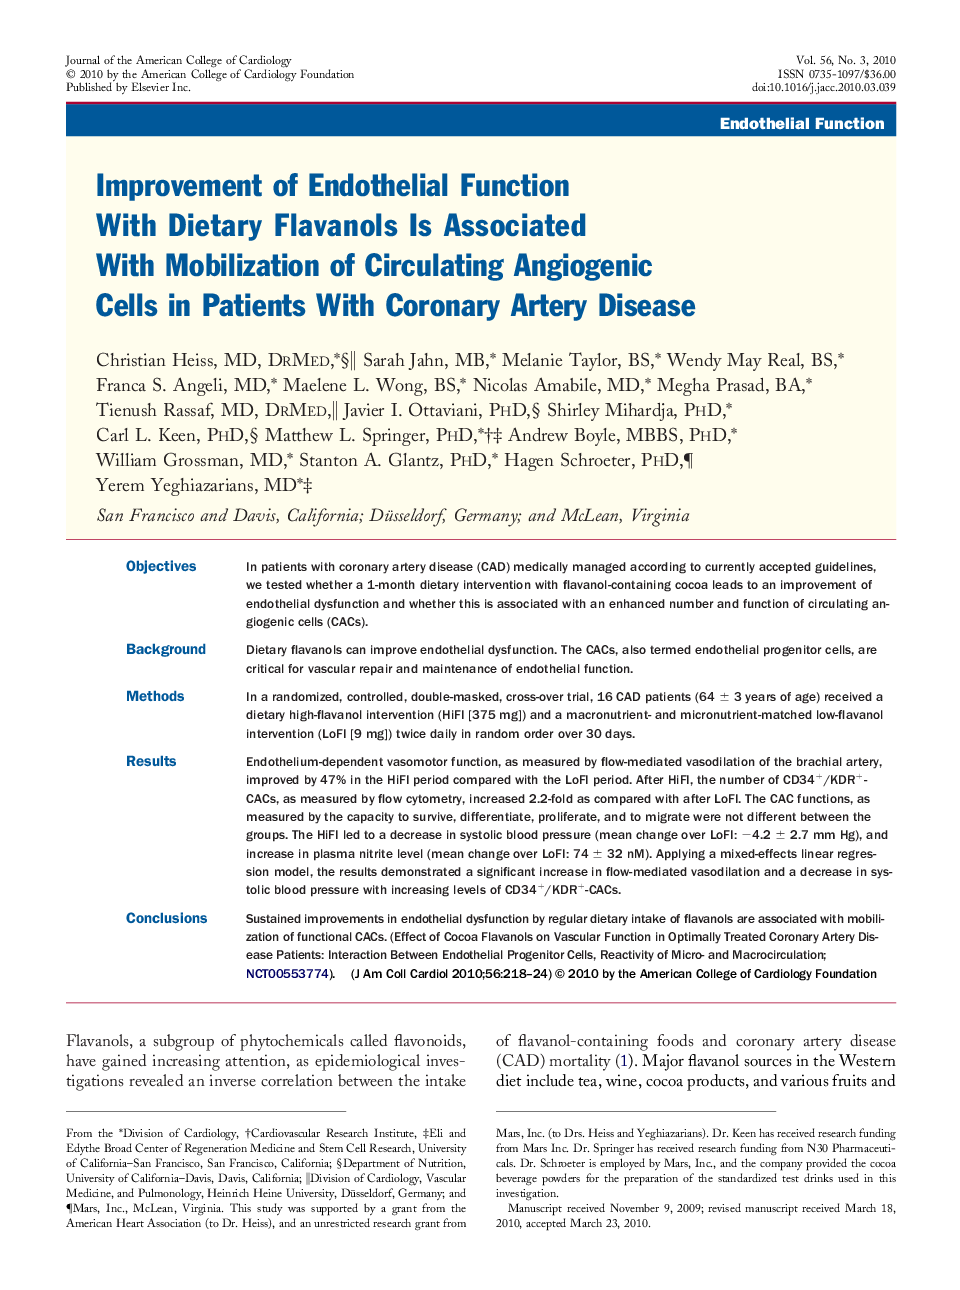 Improvement of Endothelial Function With Dietary Flavanols Is Associated With Mobilization of Circulating Angiogenic Cells in Patients With Coronary Artery Disease 